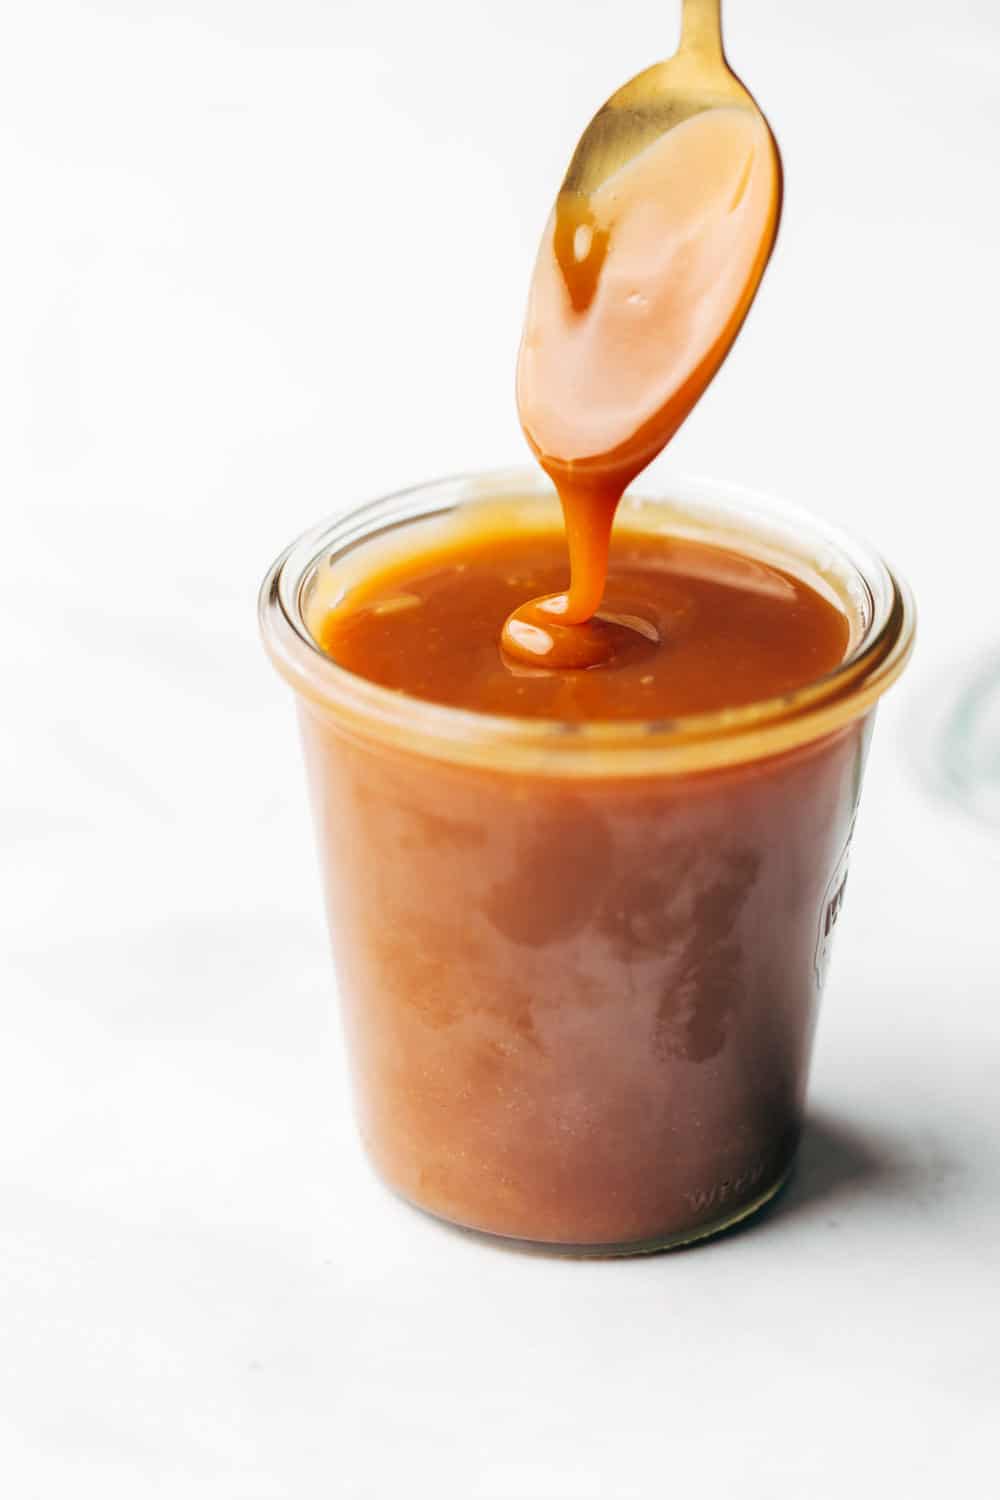 Homemade salted caramel sauce is so much better than store-bought